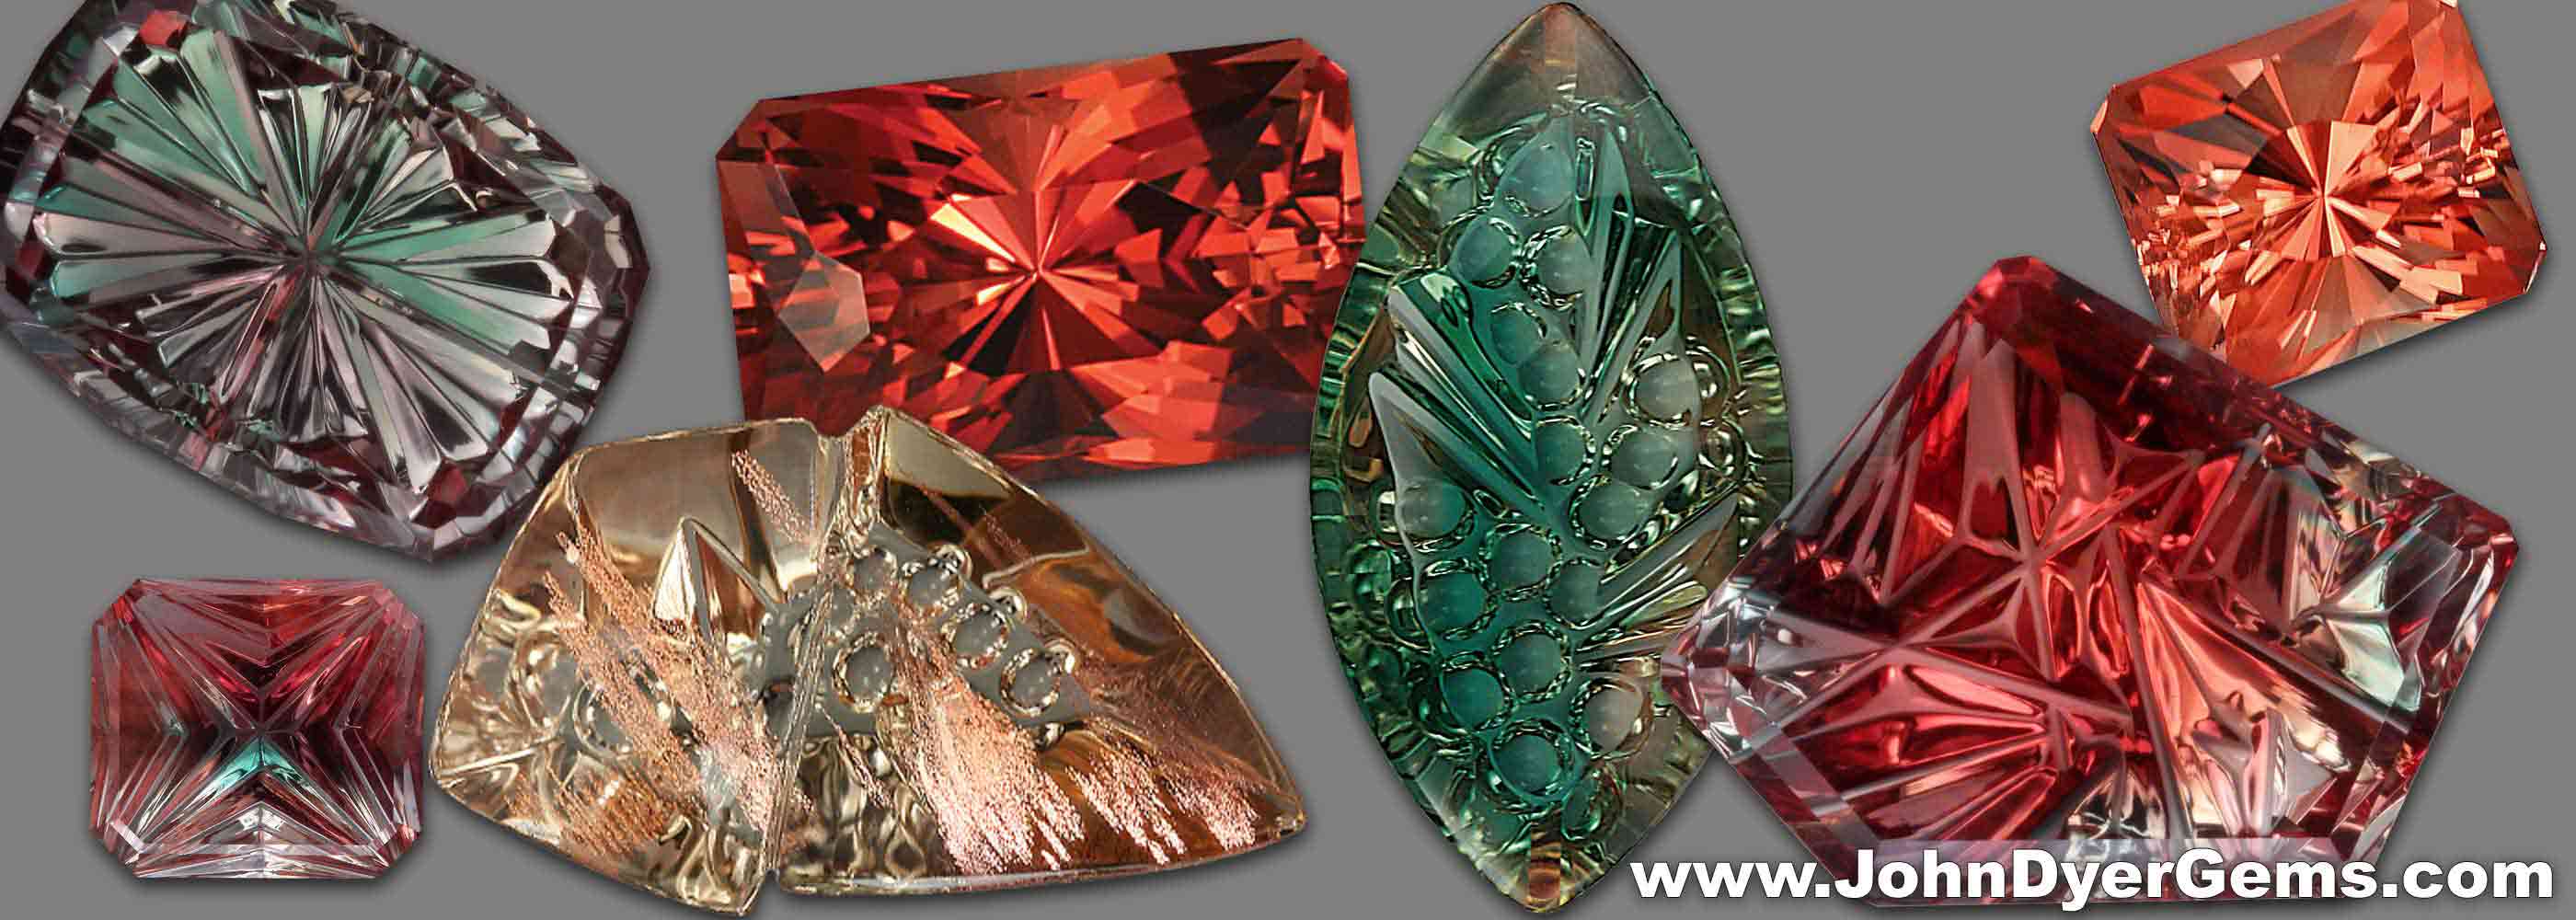 Oregon Sunstone is a beautiful natural gem that comes in many colors and when well cut can be extremely unique.